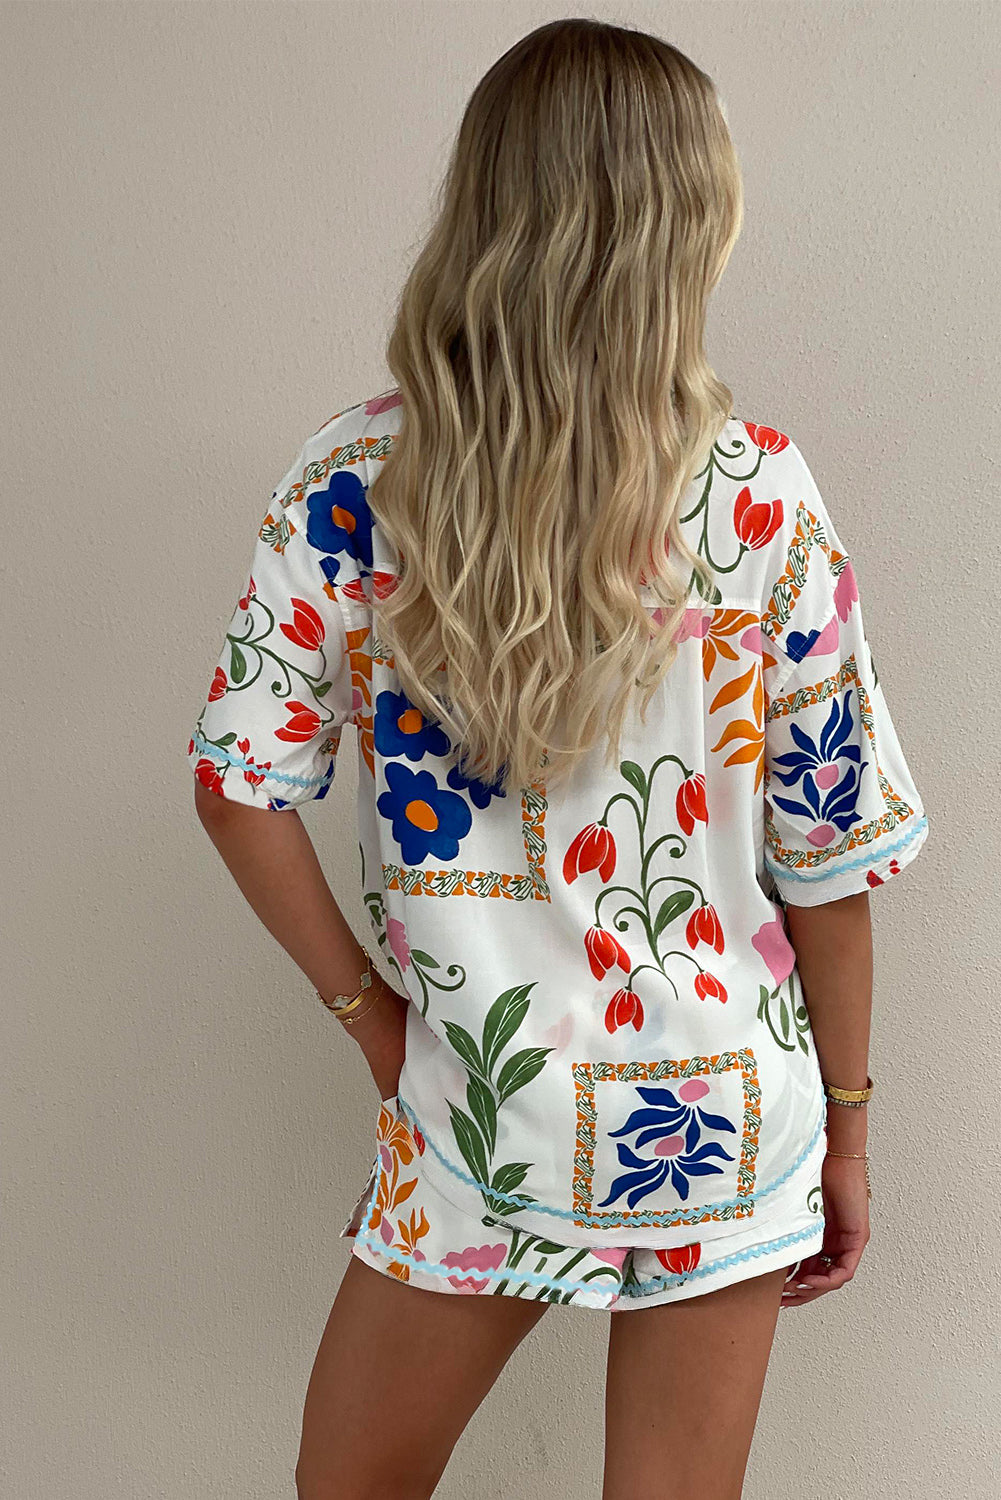 Ricrac Trim Floral Short Sleeve Shirt and Shorts Outfit